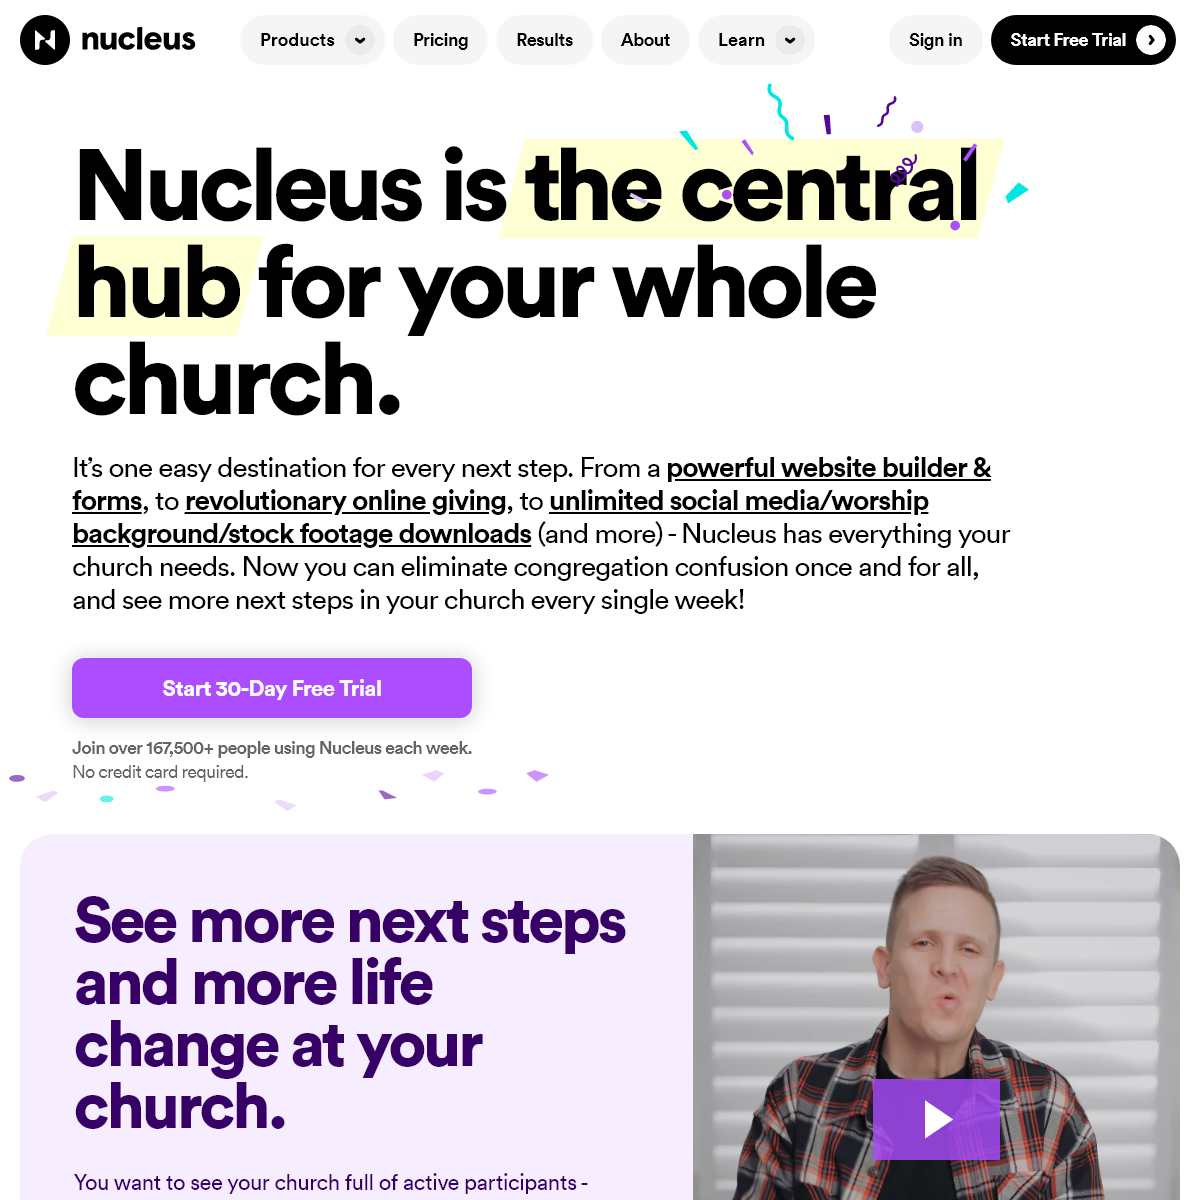 A complete backup of nucleus.church